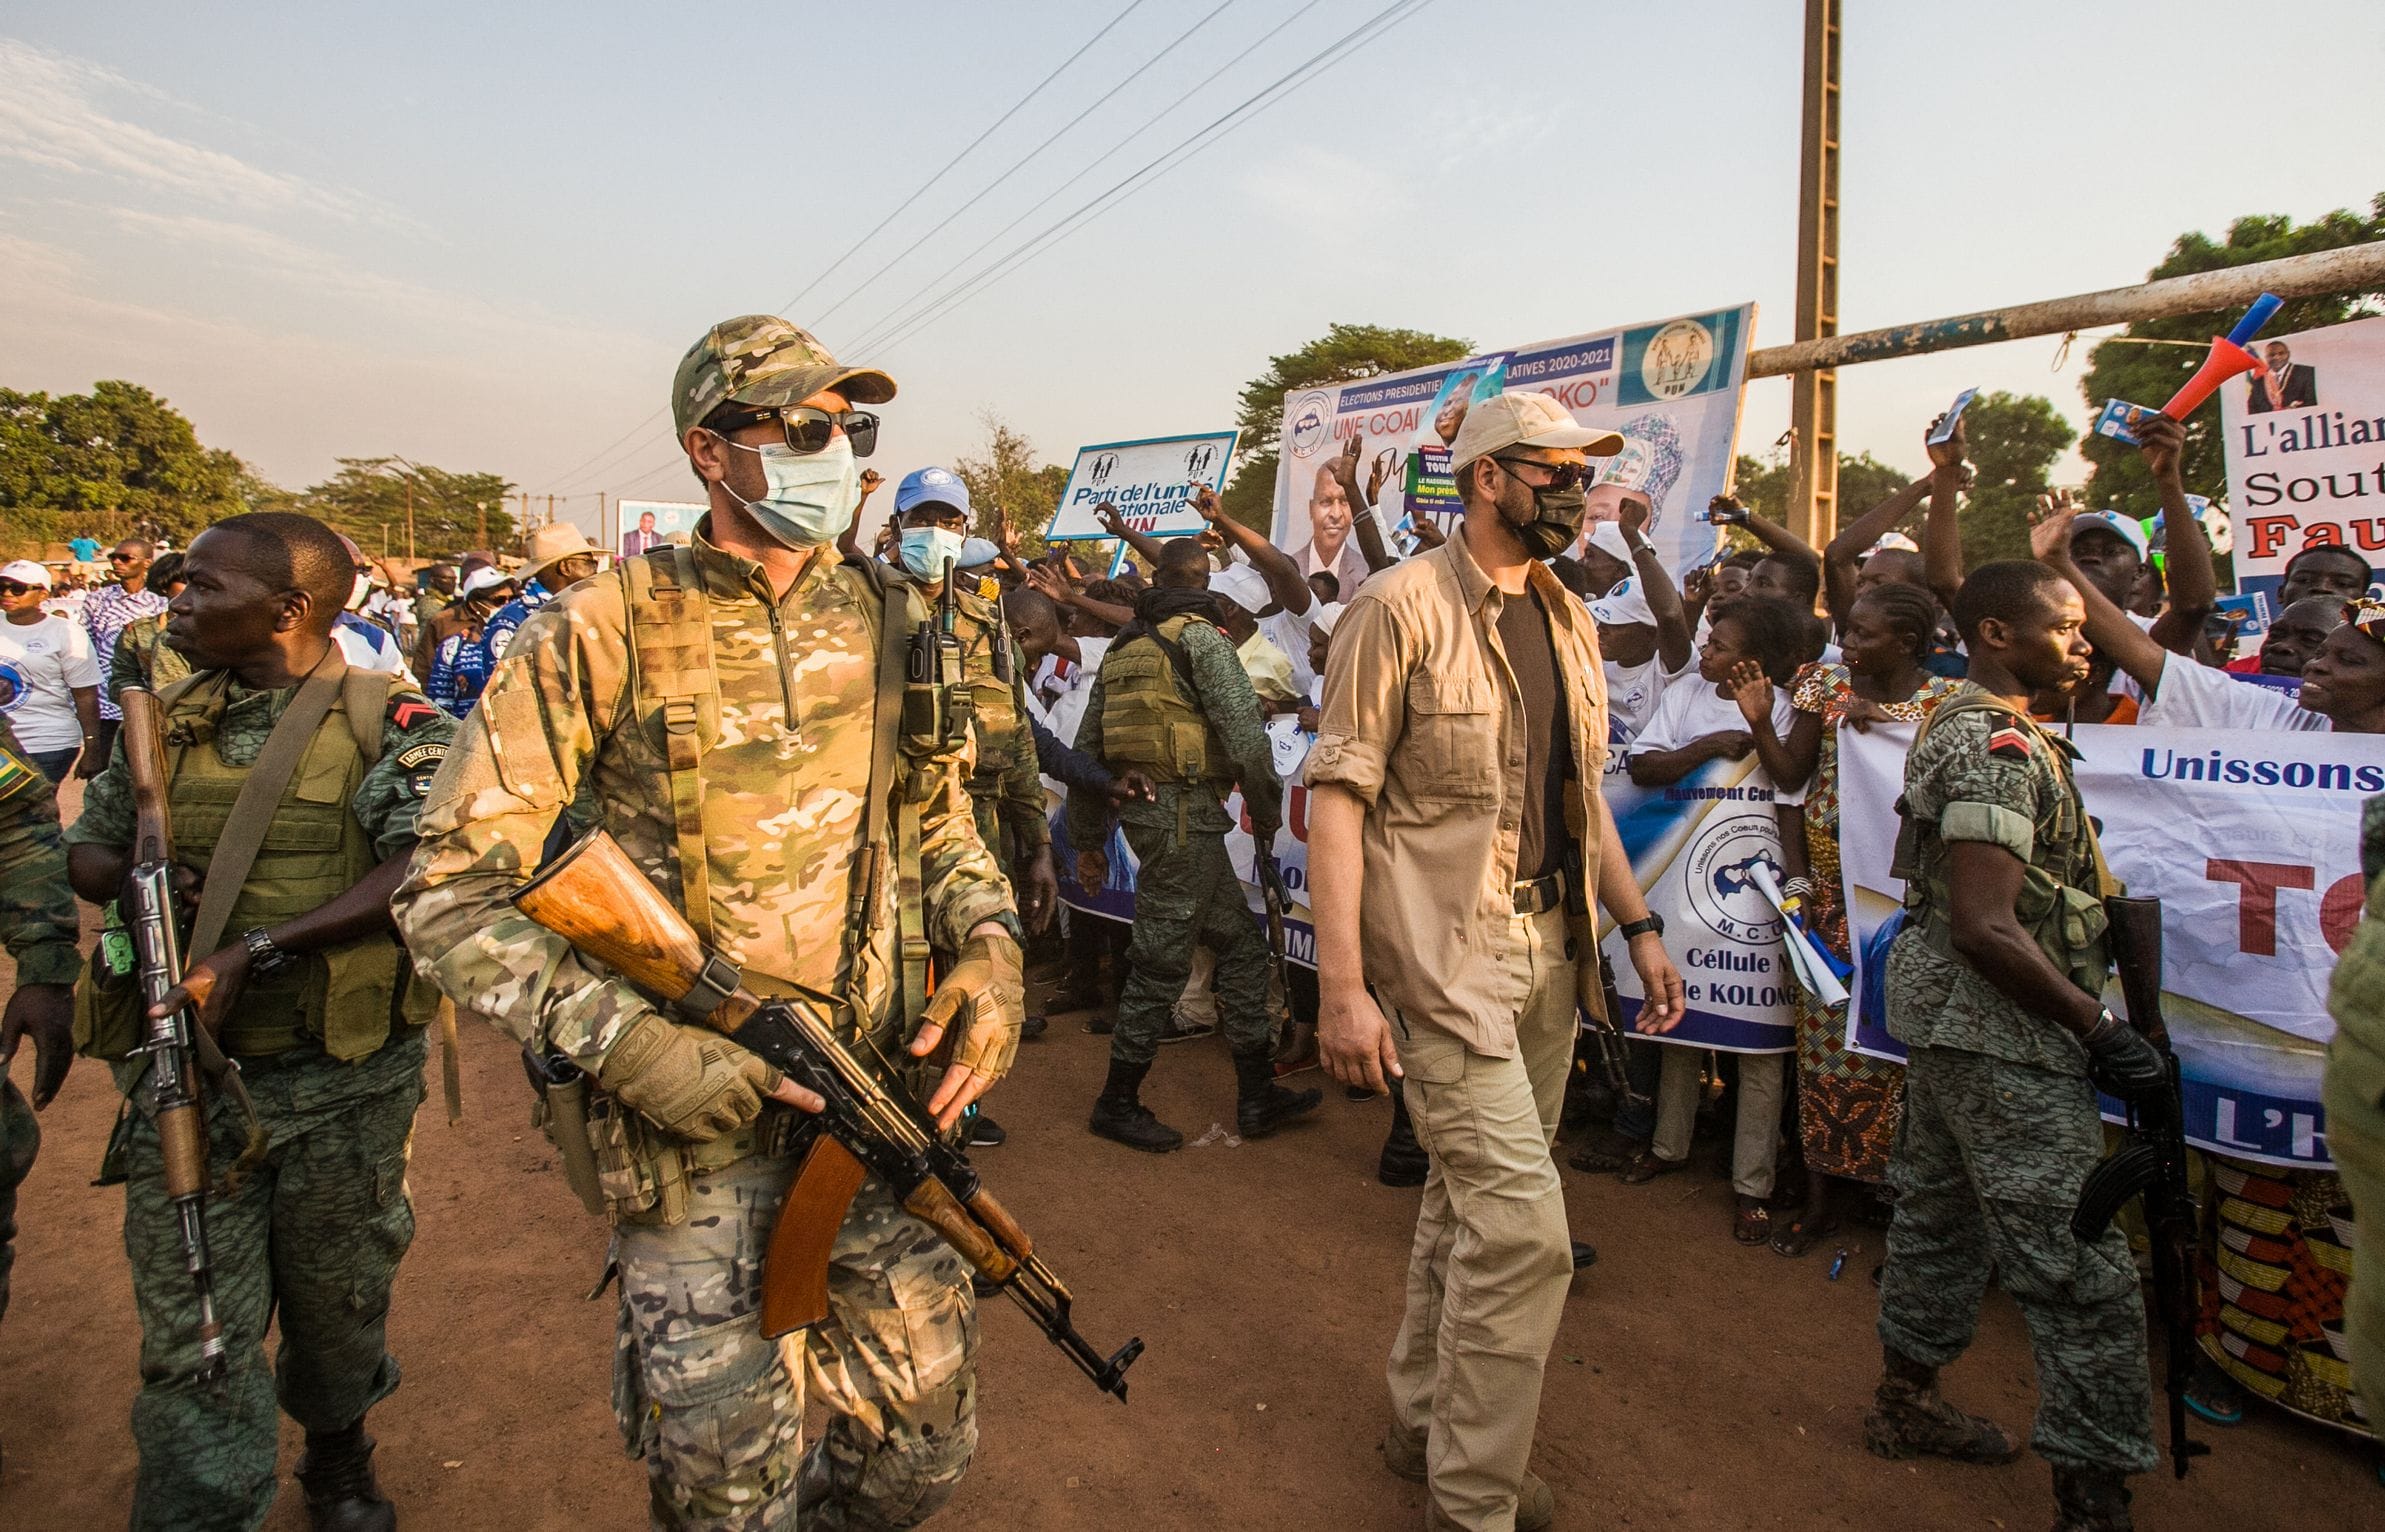 Russian and Rwandan security forces take measures around the site during election meeting in Bangui, Central African Republic